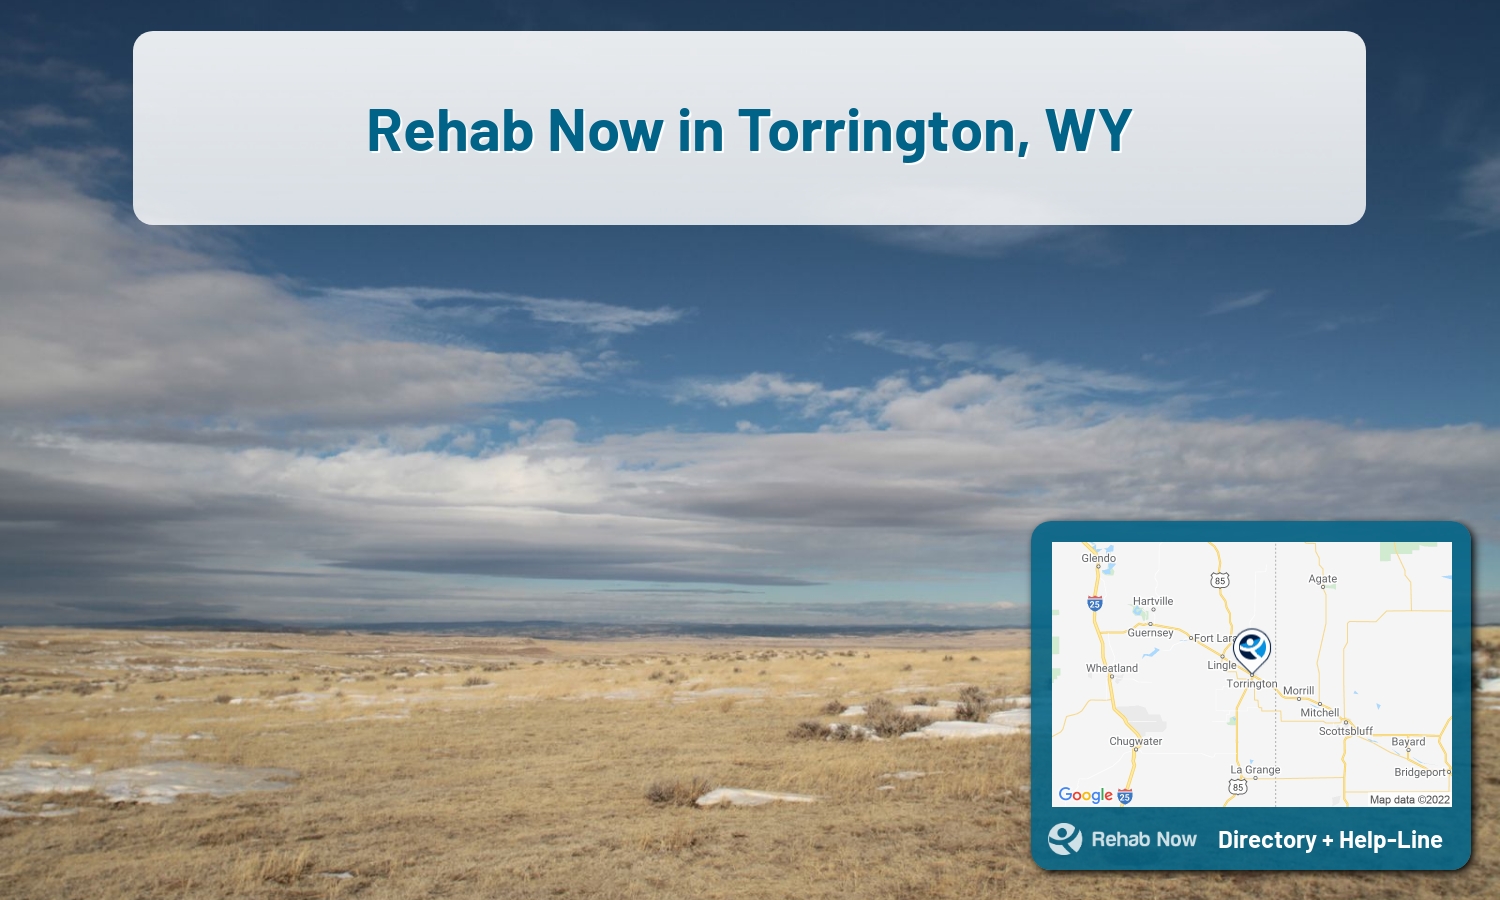 View options, availability, treatment methods, and more, for drug rehab and alcohol treatment in Torrington, Wyoming